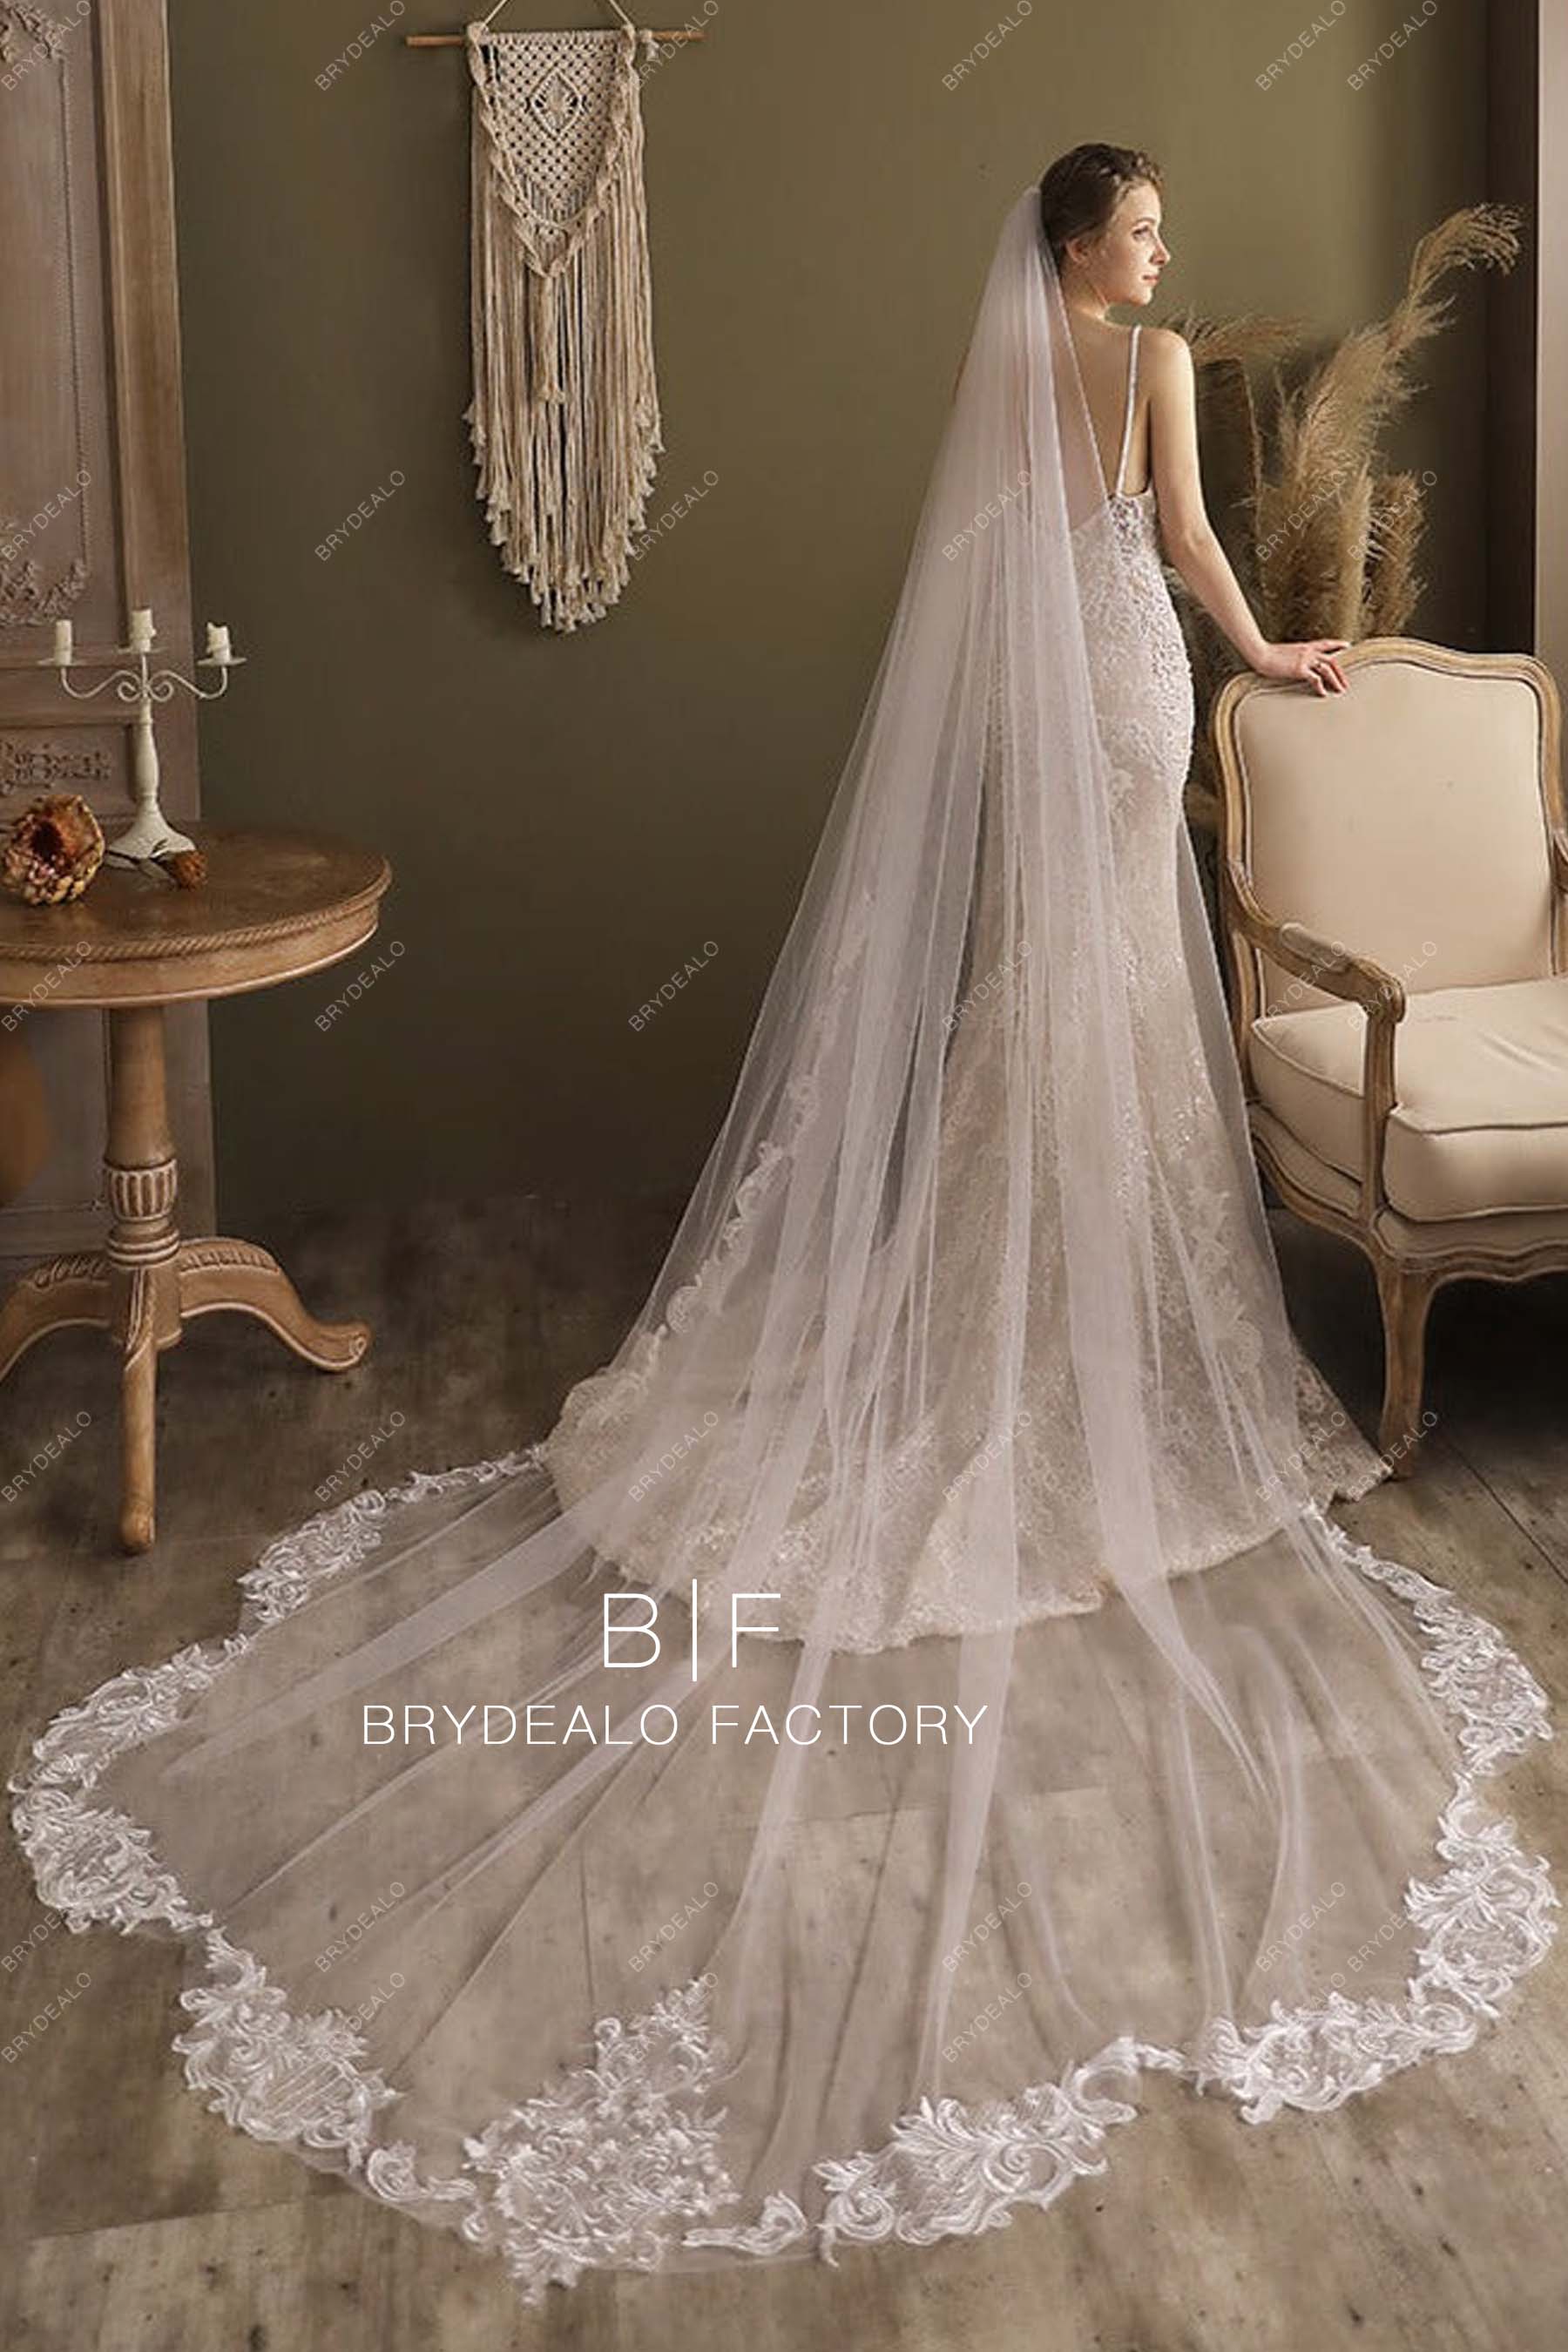 https://cdn.shopify.com/s/files/1/0558/7599/3647/products/Cutout-Lace-Edge-Cathedral-Length-Wedding-Veil.jpg?v=1668578812&width=1800